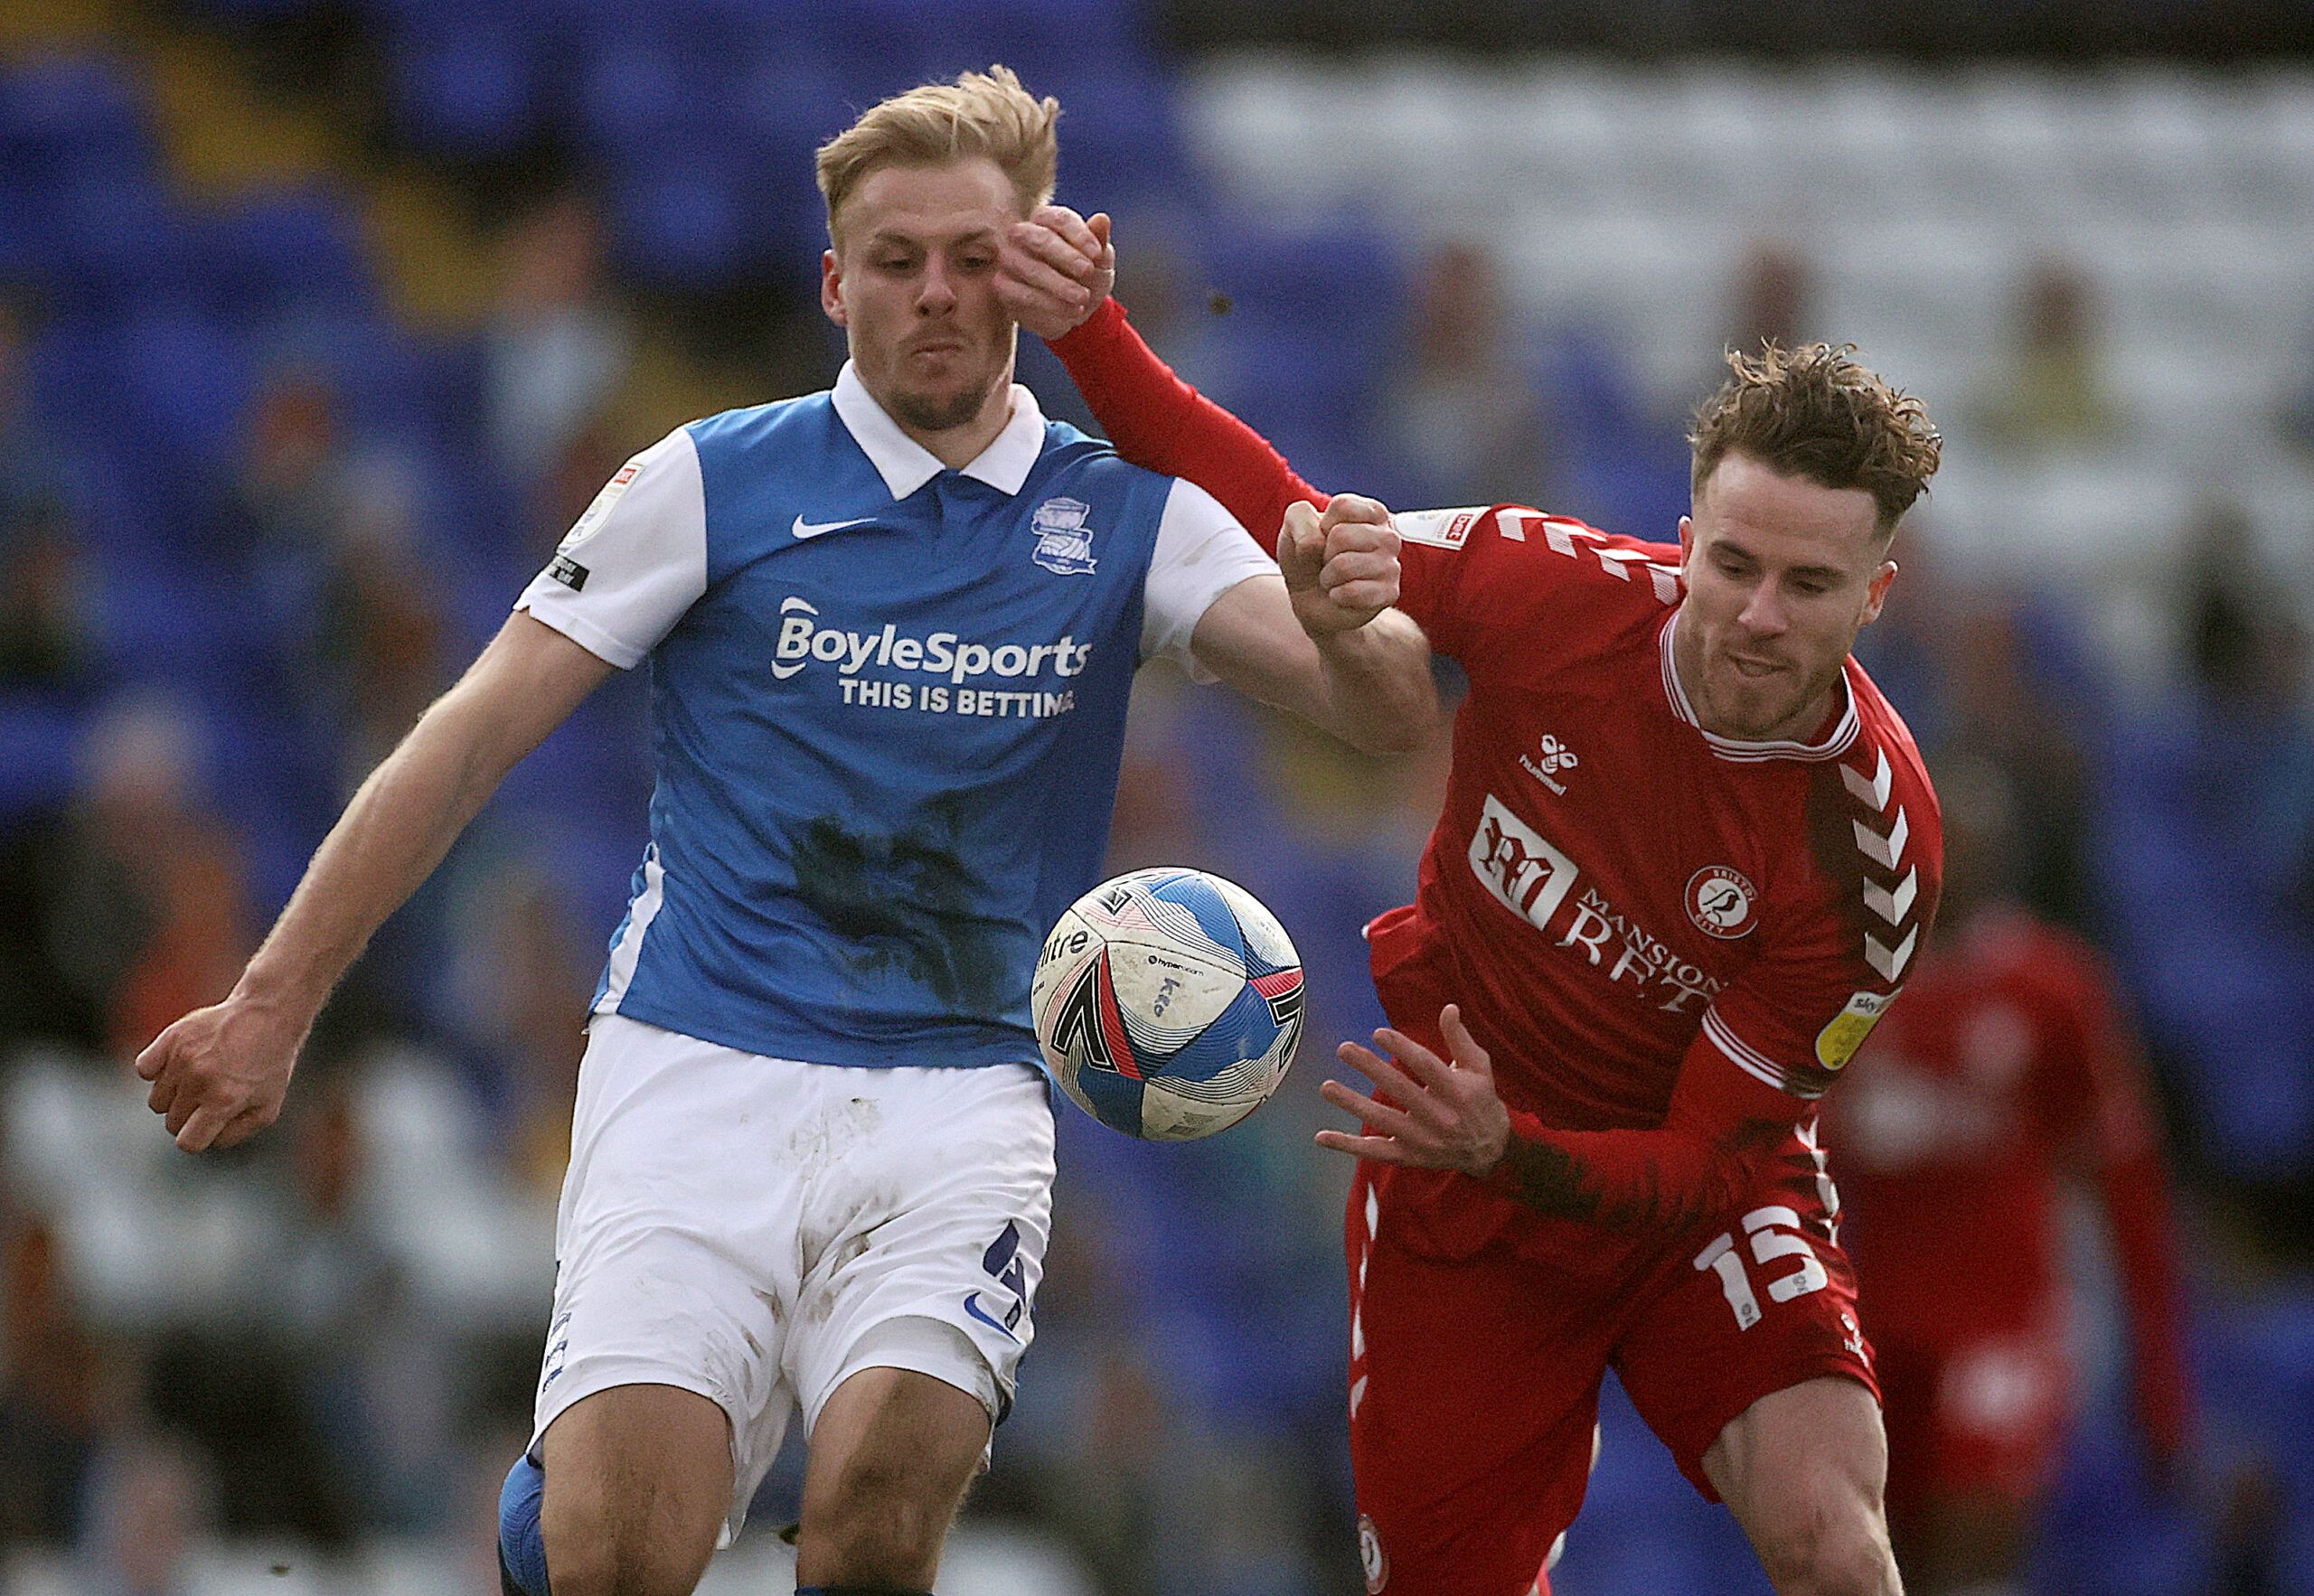 Soccer Football - Championship - Birmingham City v Bristol City - St Andrew's, Birmingham, Britain - March 13, 2021 Birmingham City's Marc Roberts in action with Bristol City's Marley Watkins Action Images/Carl Recine EDITORIAL USE ONLY. No use with unauthorized audio, video, data, fixture lists, club/league logos or 'live' services. Online in-match use limited to 75 images, no video emulation. No use in betting, games or single club /league/player publications.  Please contact your account repr